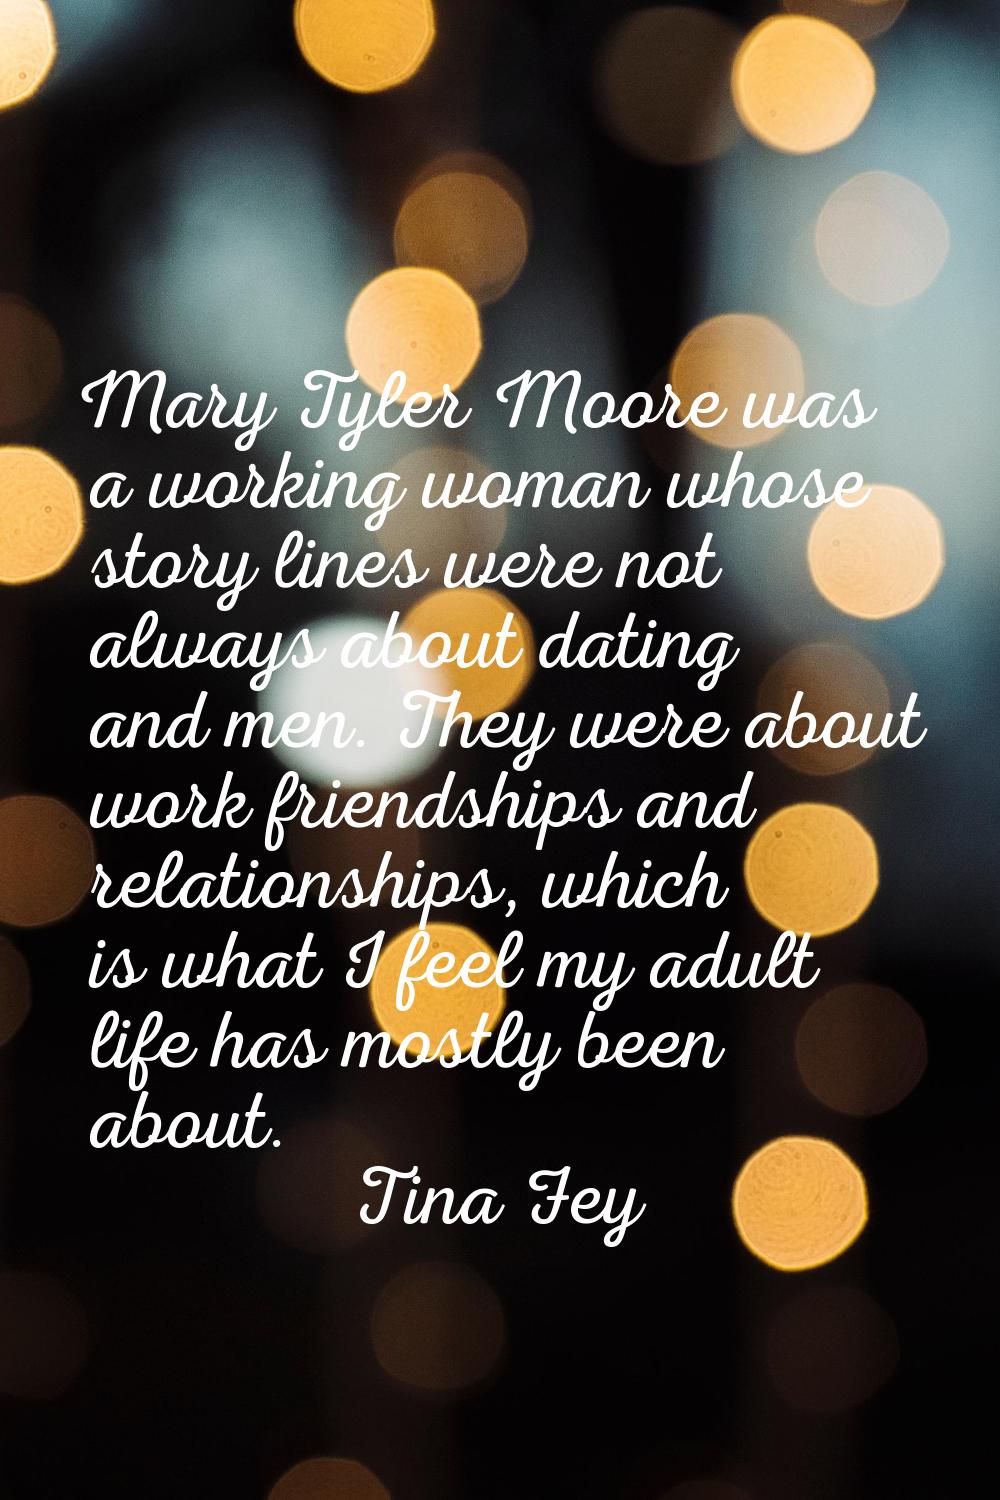 Mary Tyler Moore was a working woman whose story lines were not always about dating and men. They w